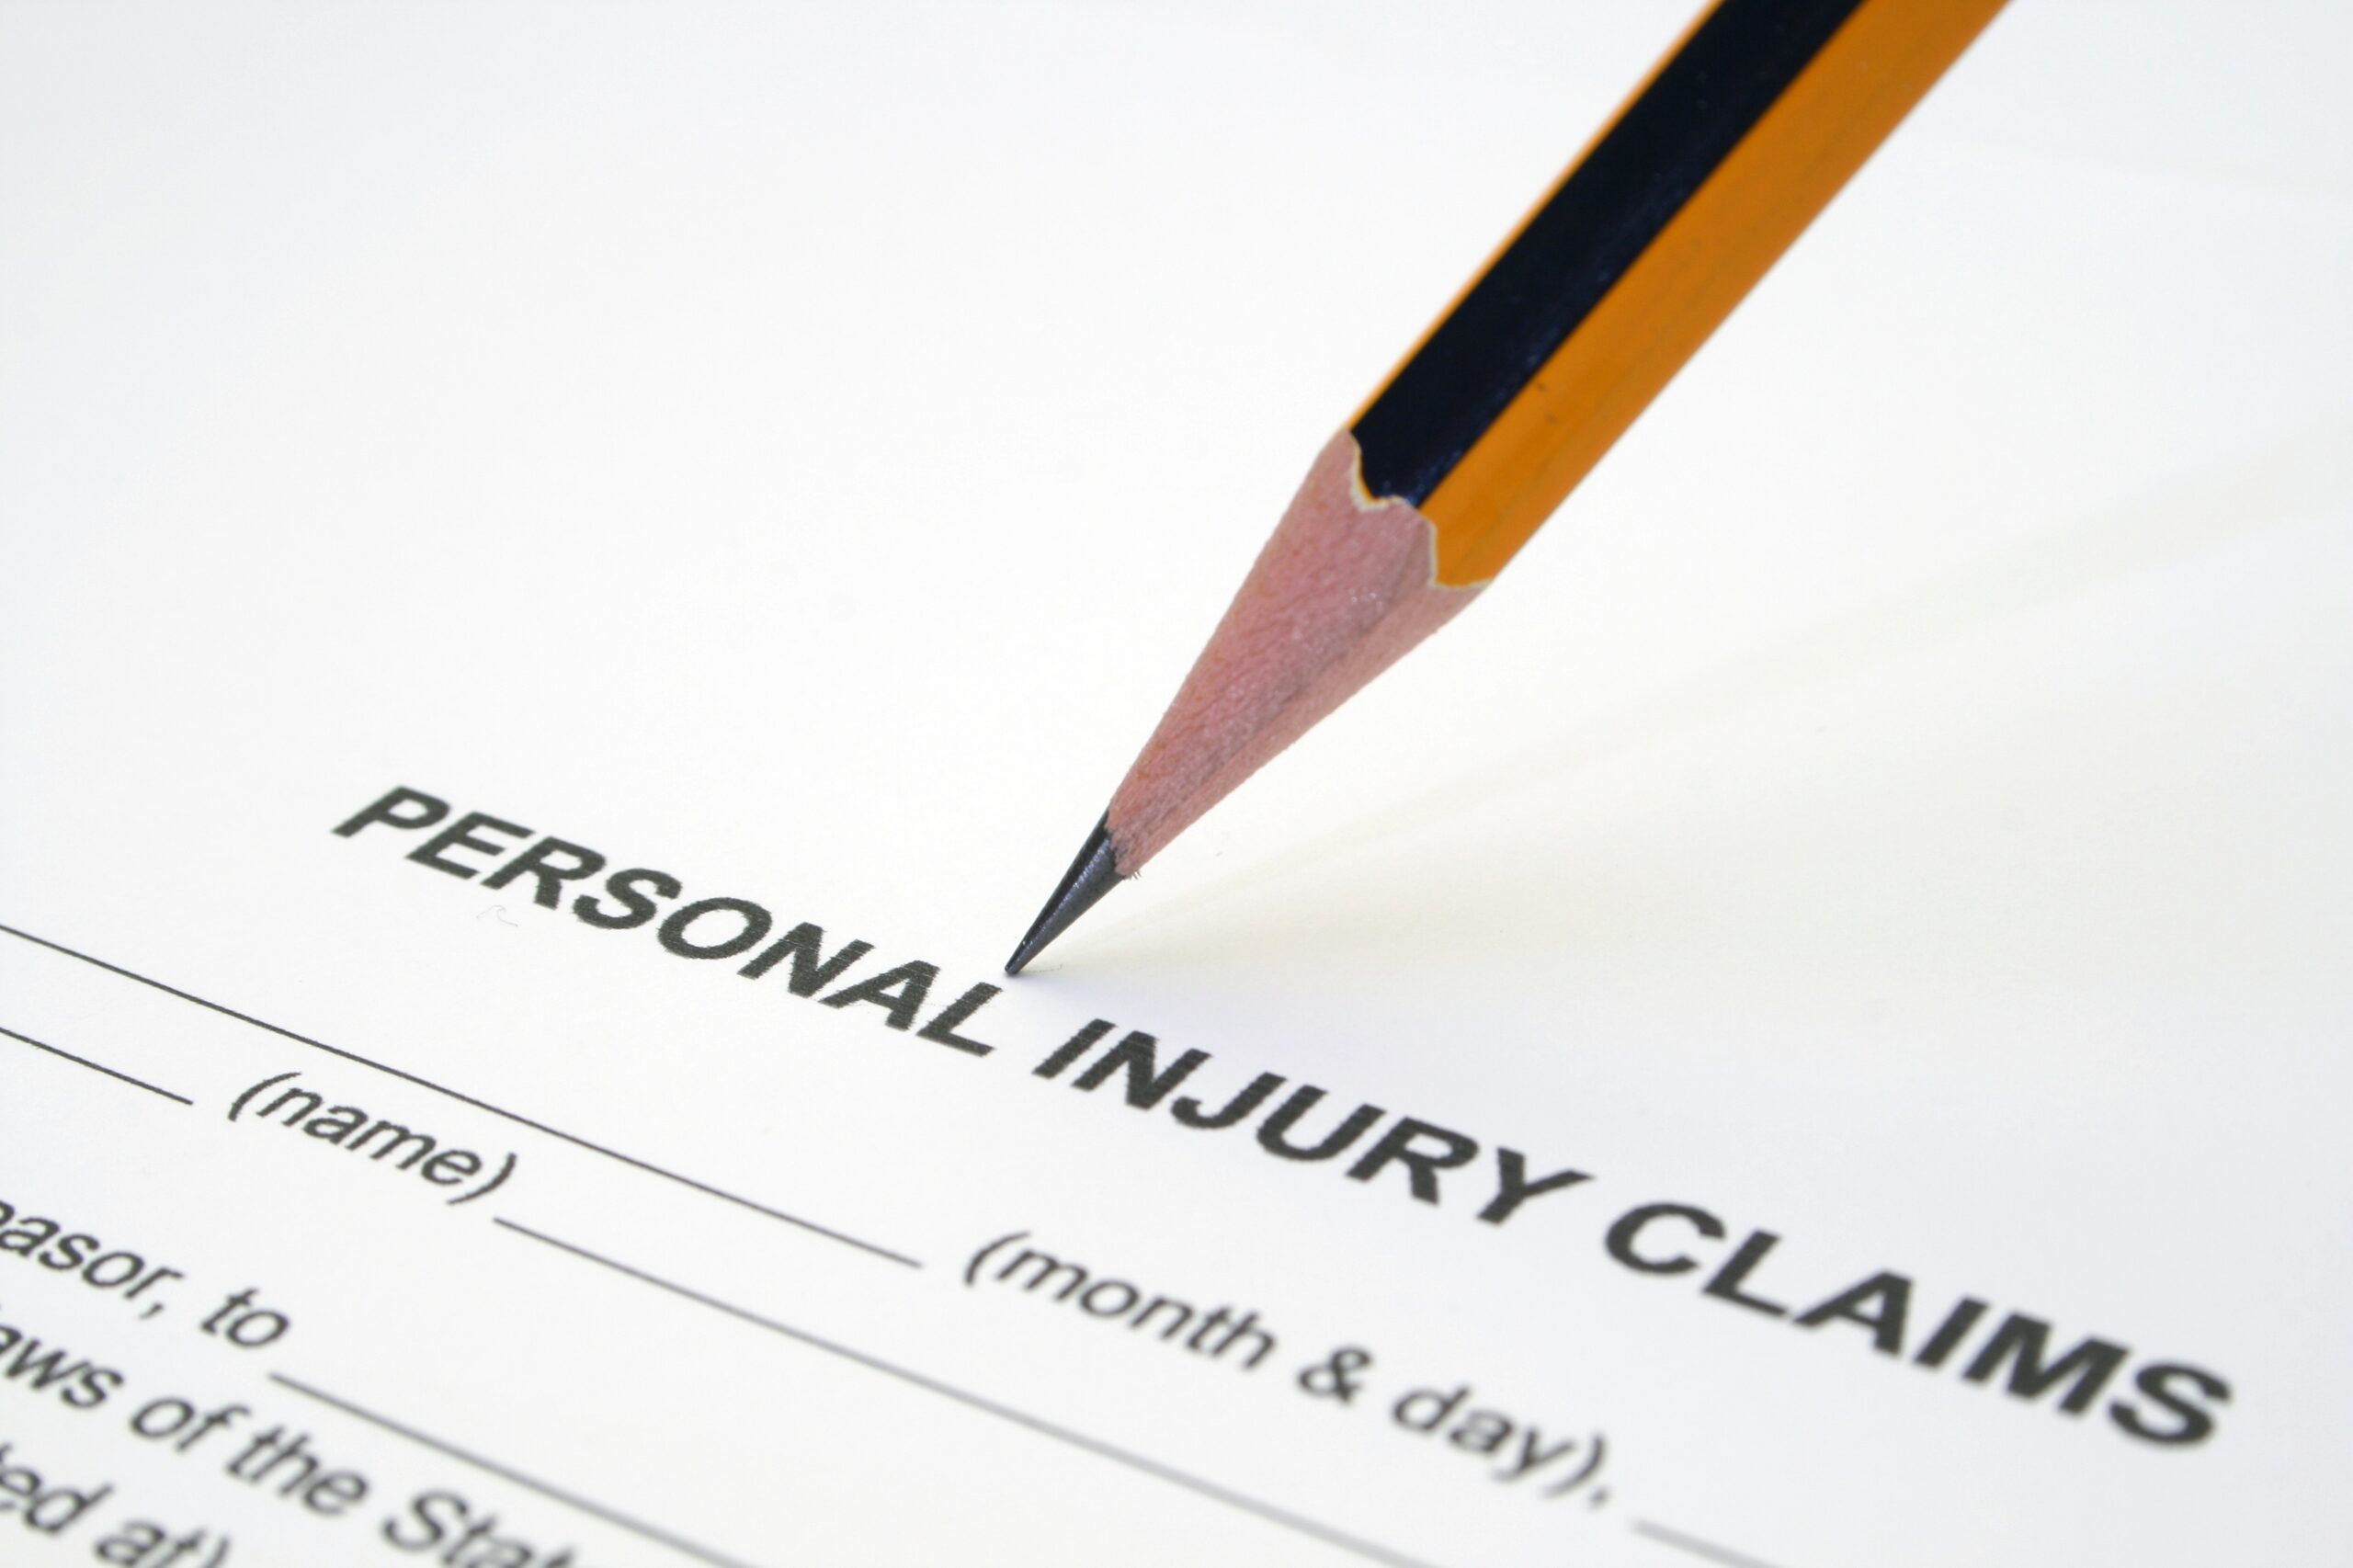 Maximizing Damages in Small Personal Injury Cases